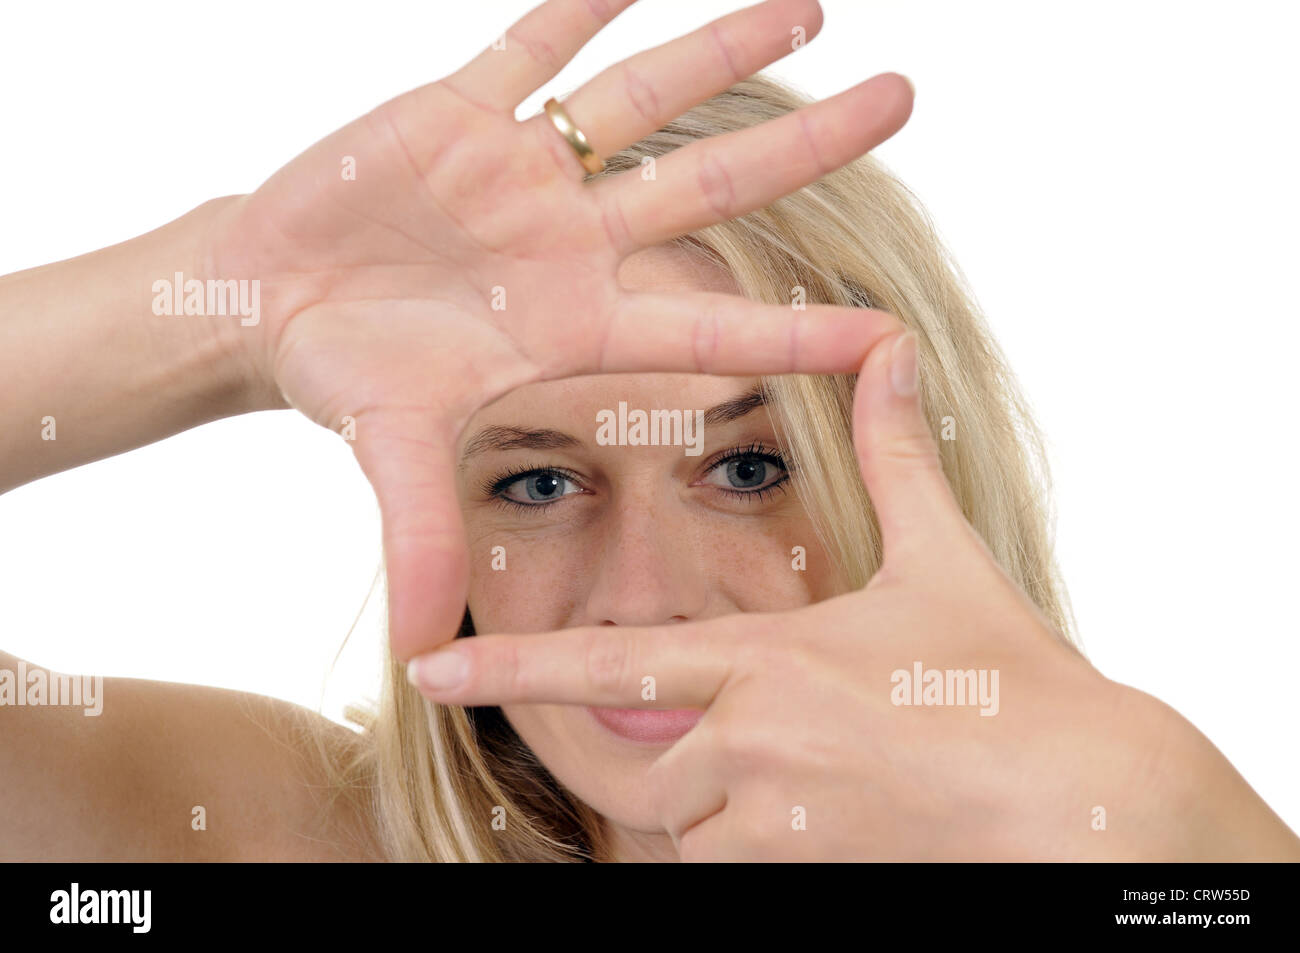 young woman with perspective Stock Photo